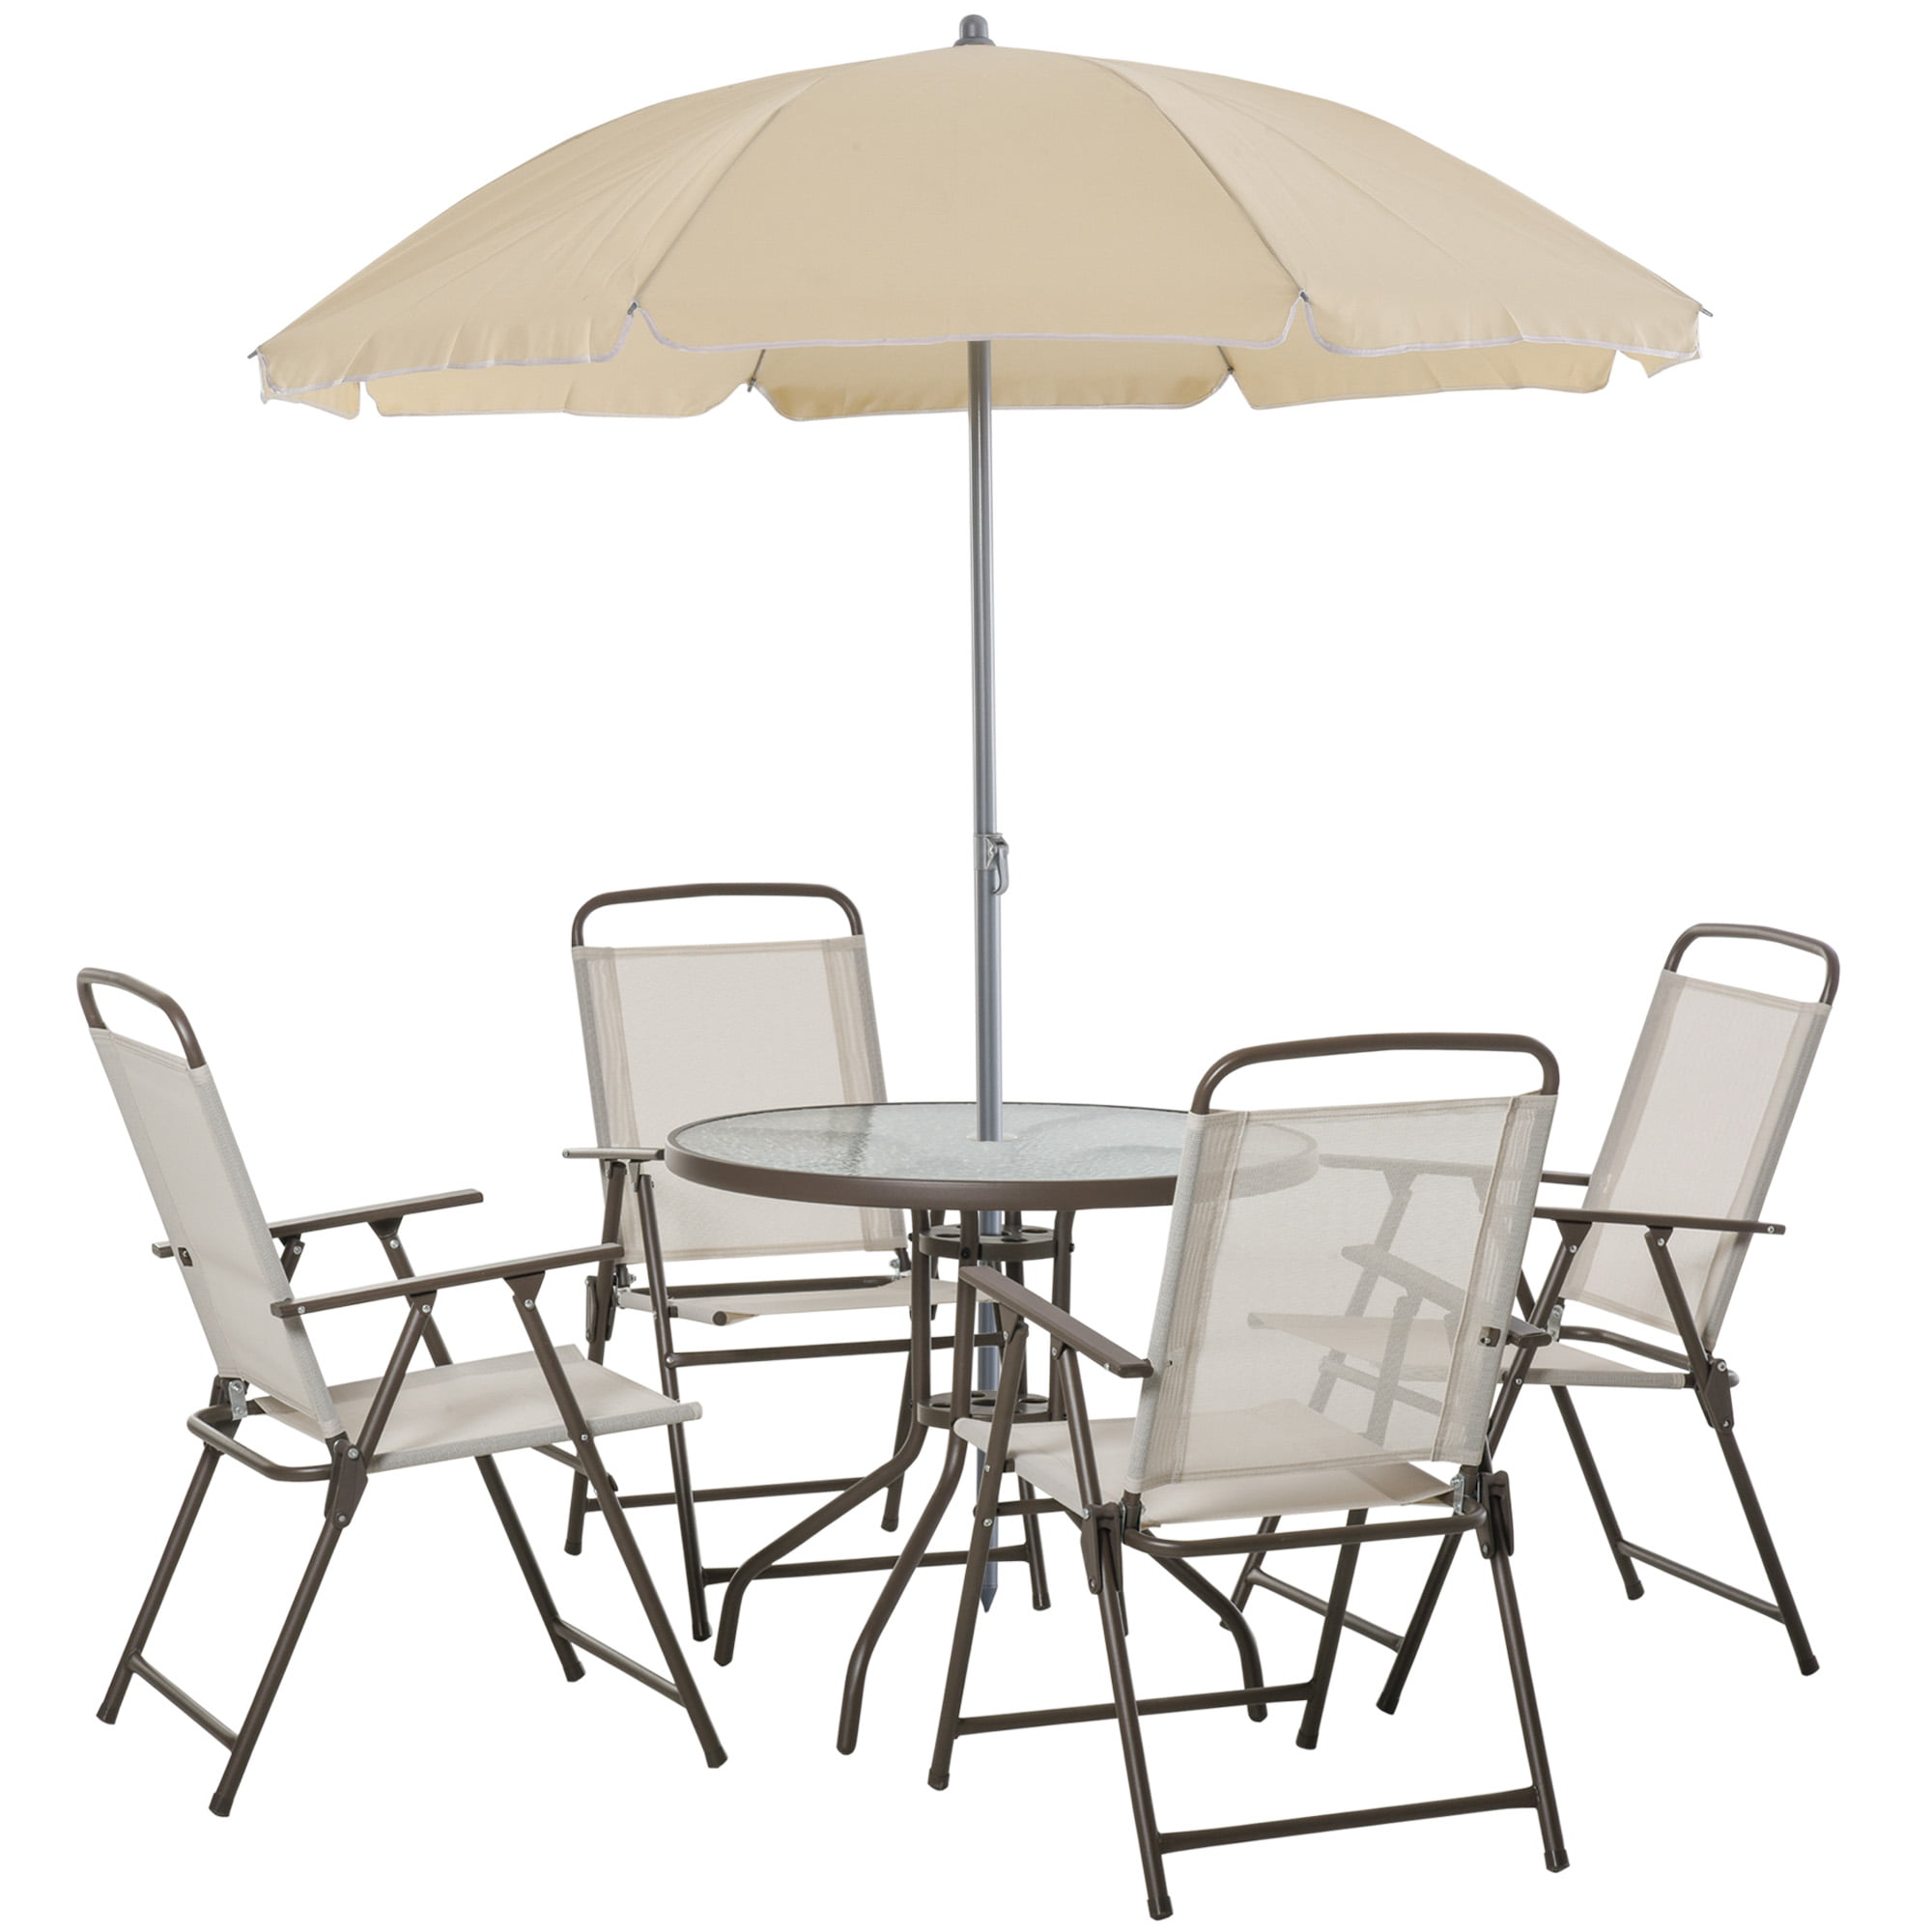 Outsunny 6pc Patio Dining Furniture Set, Glass Patio Dining Set With Umbrella